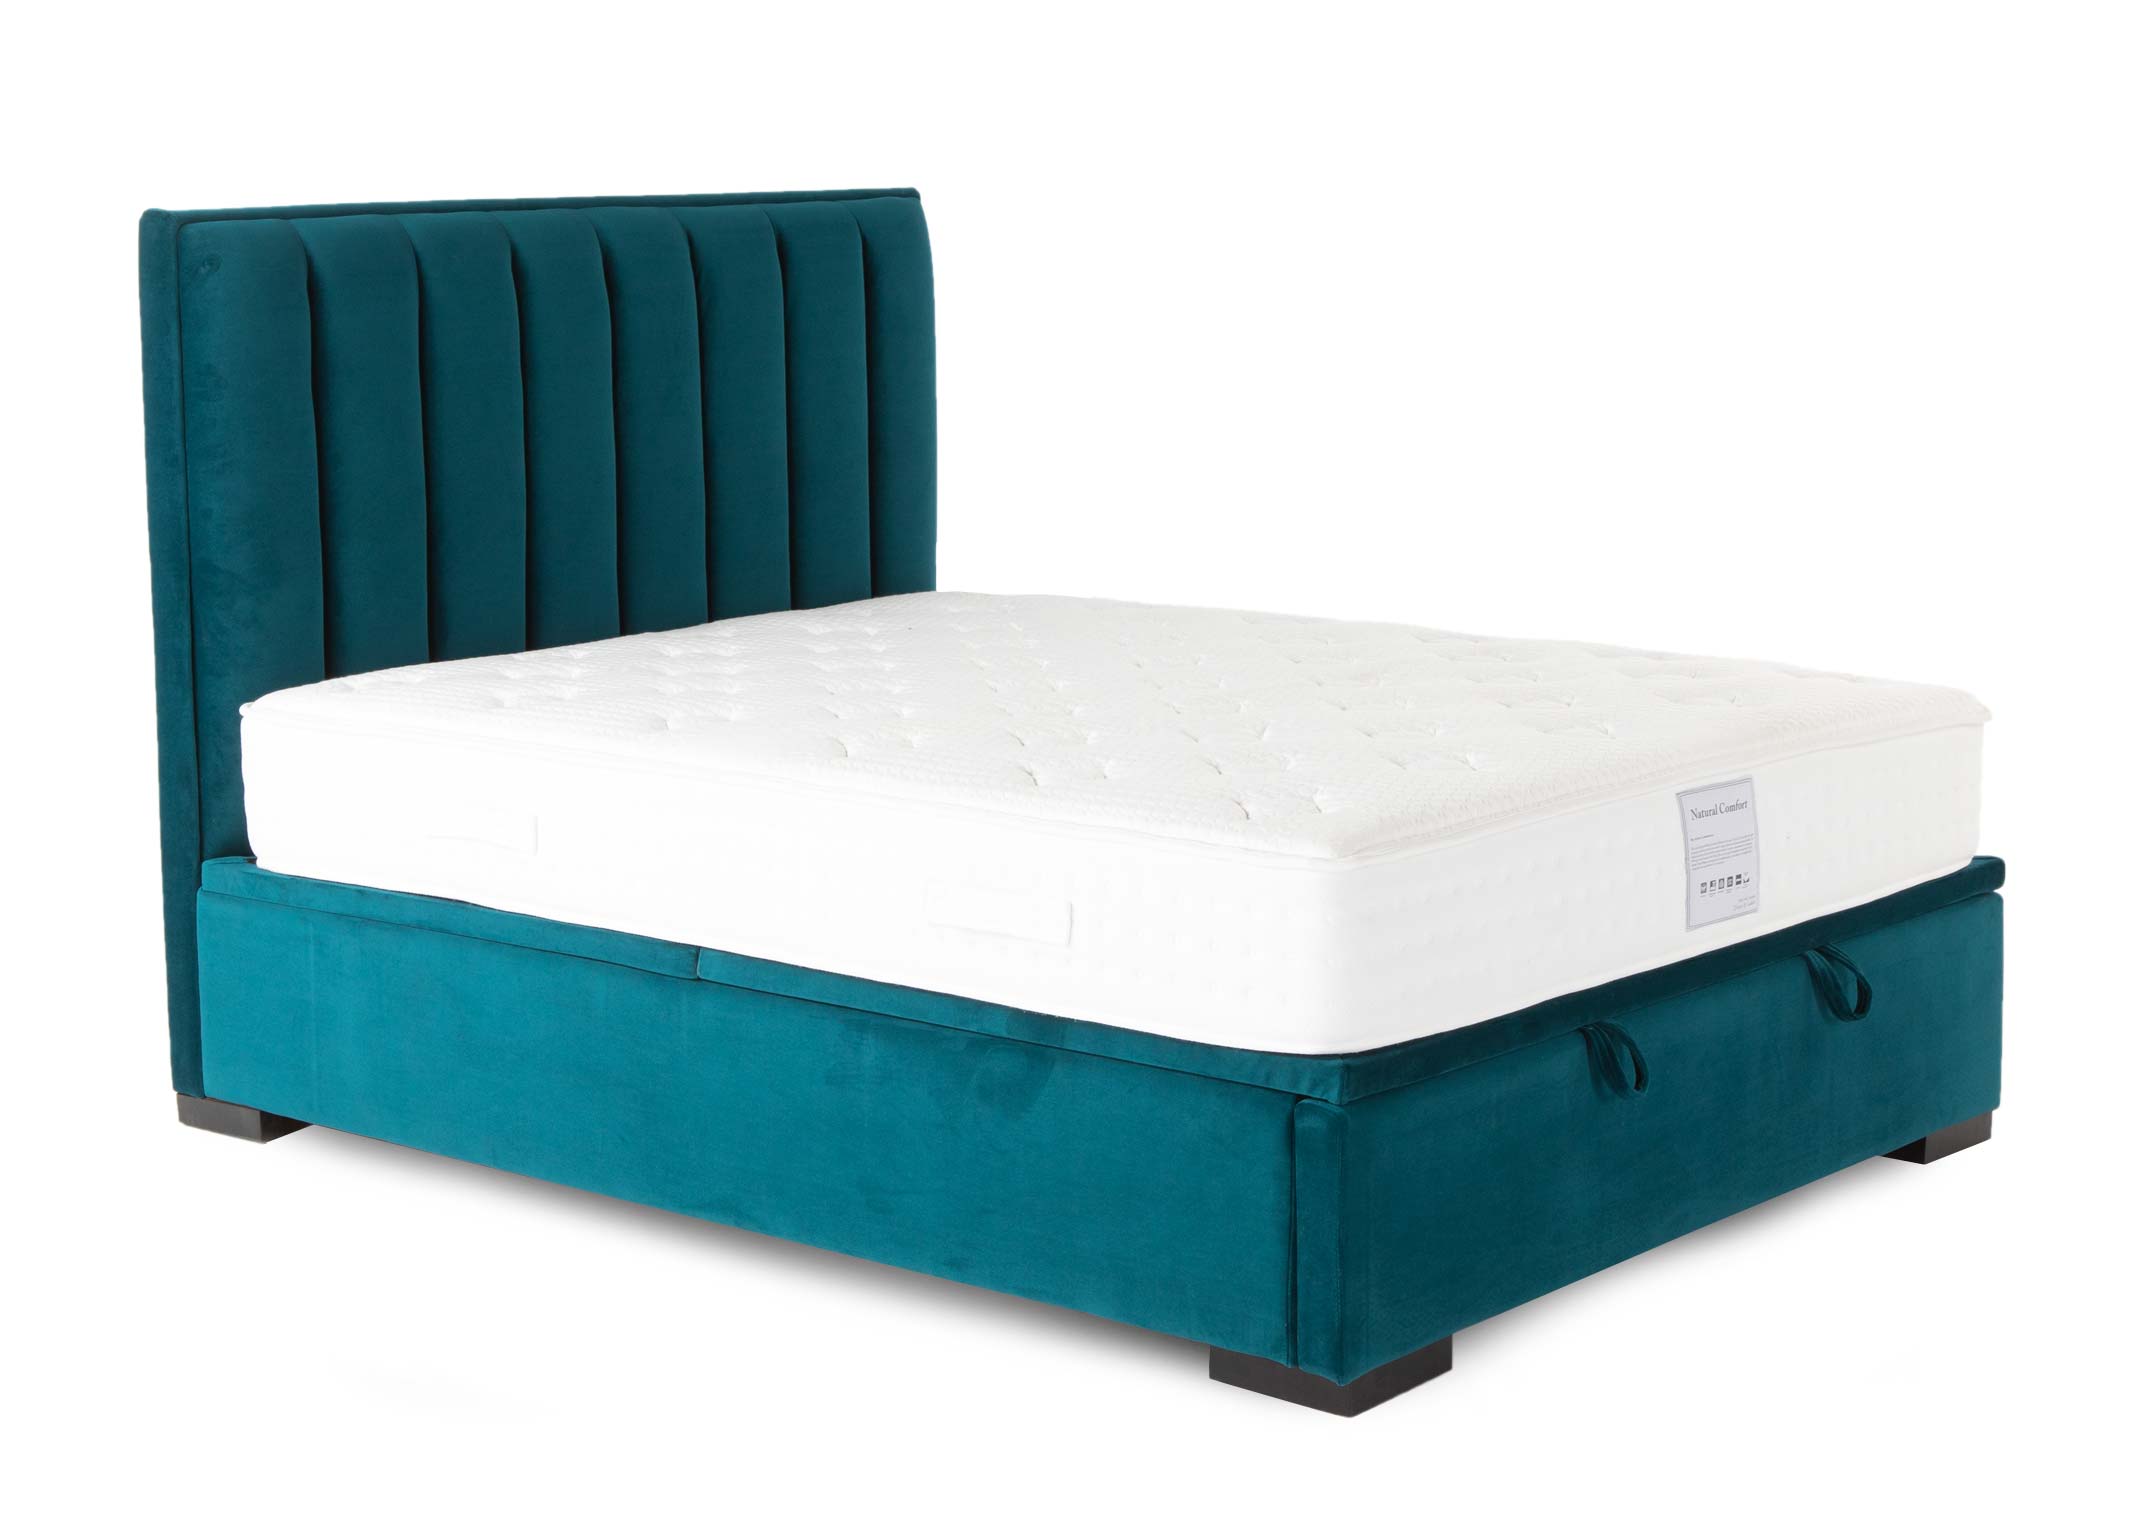 Teal Velvet Ottoman Bed Liberty, Teal Bed Frame Queen